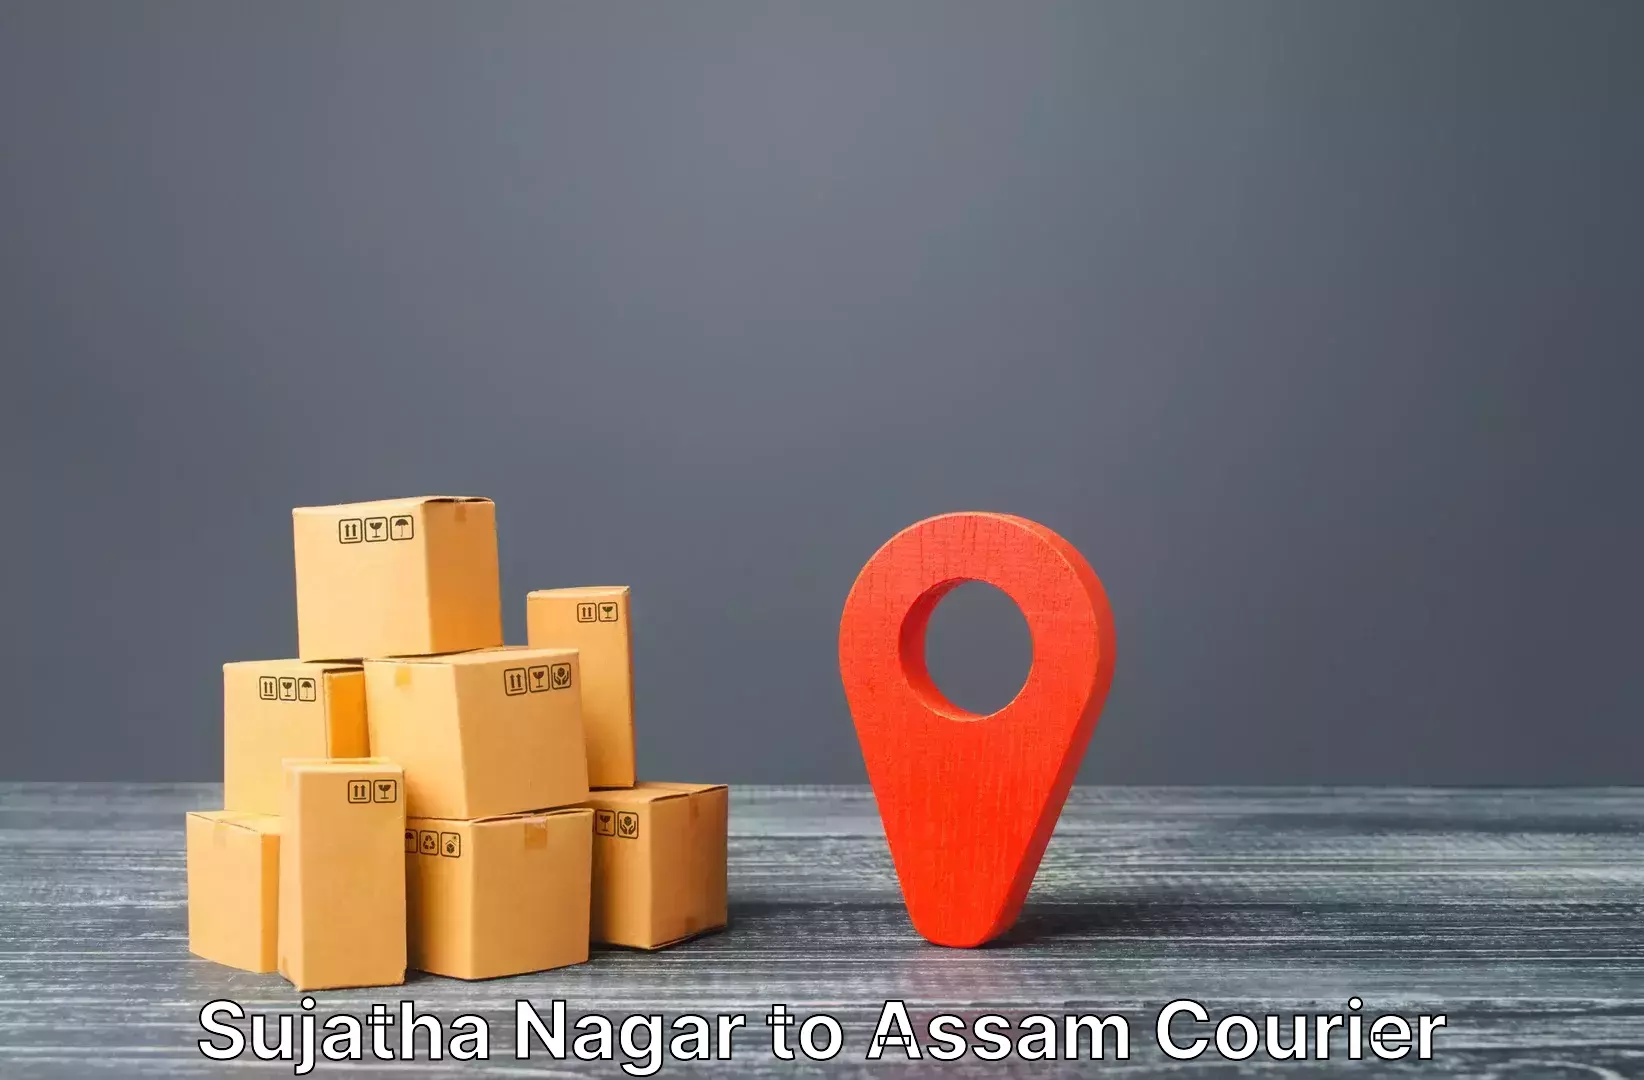 Instant baggage transport quote Sujatha Nagar to Assam